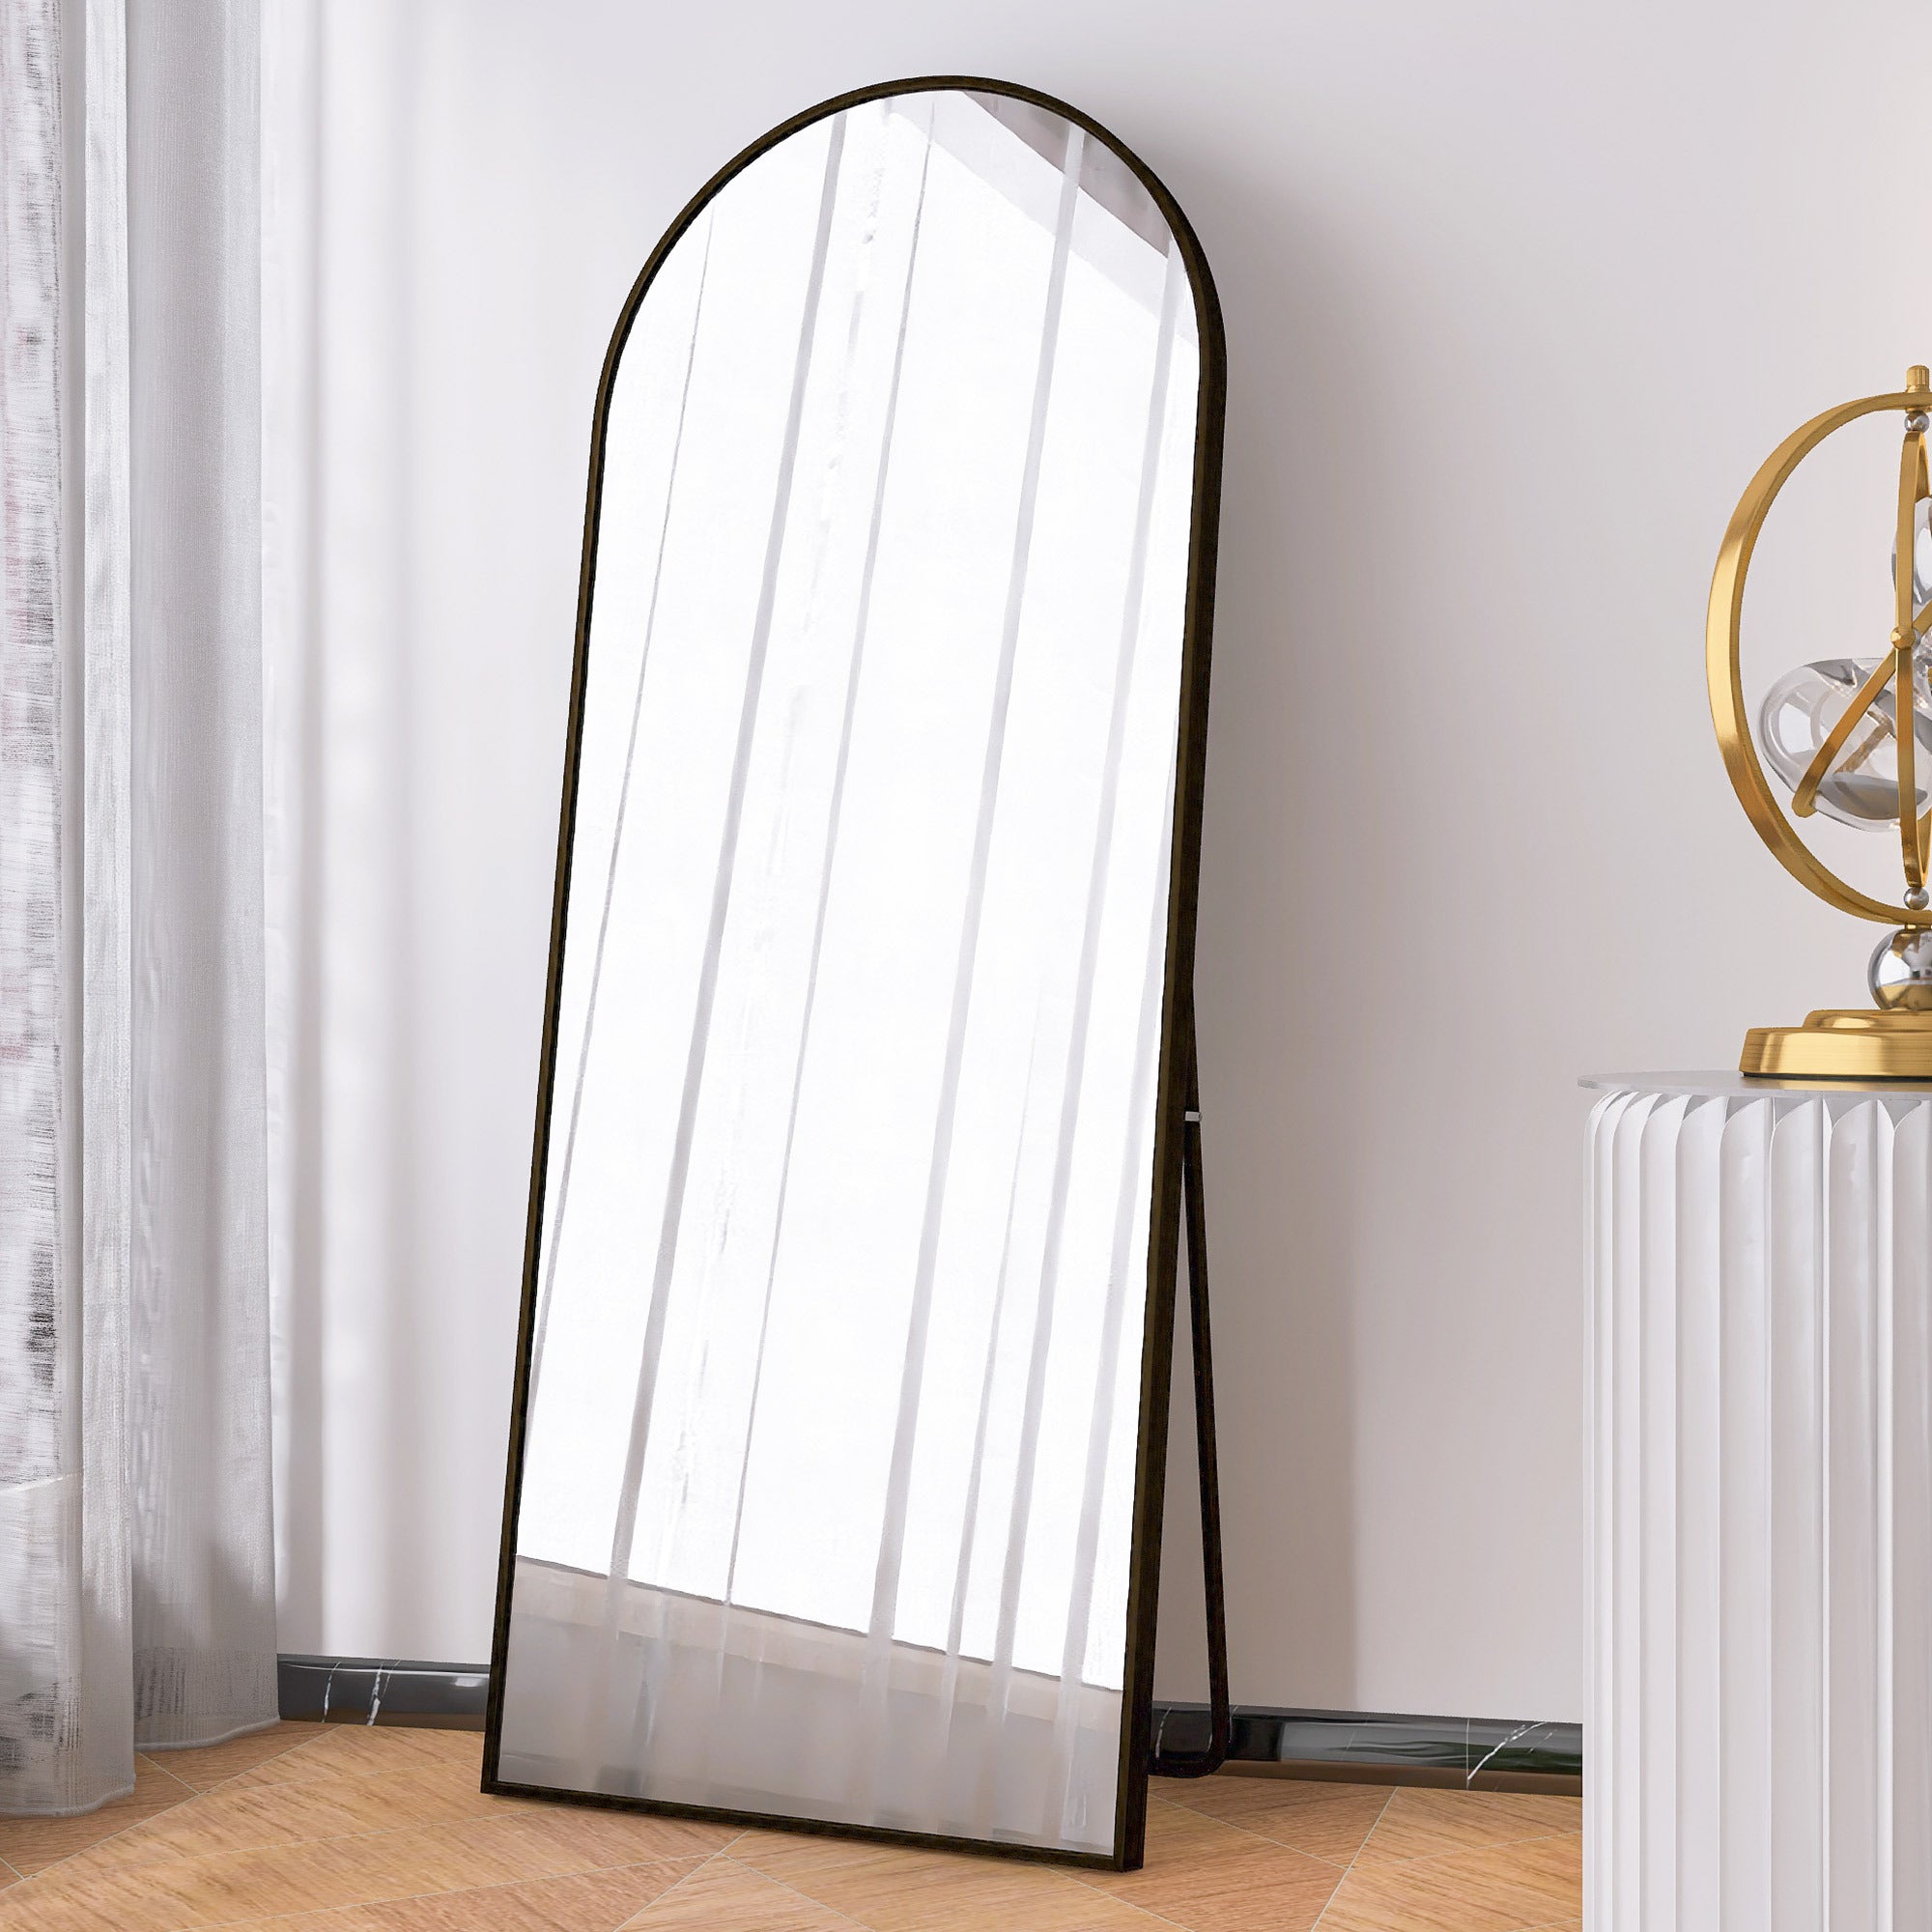 Arched Full Length Mirror Floor Mirror Hanging Standing or Leaning (Black)